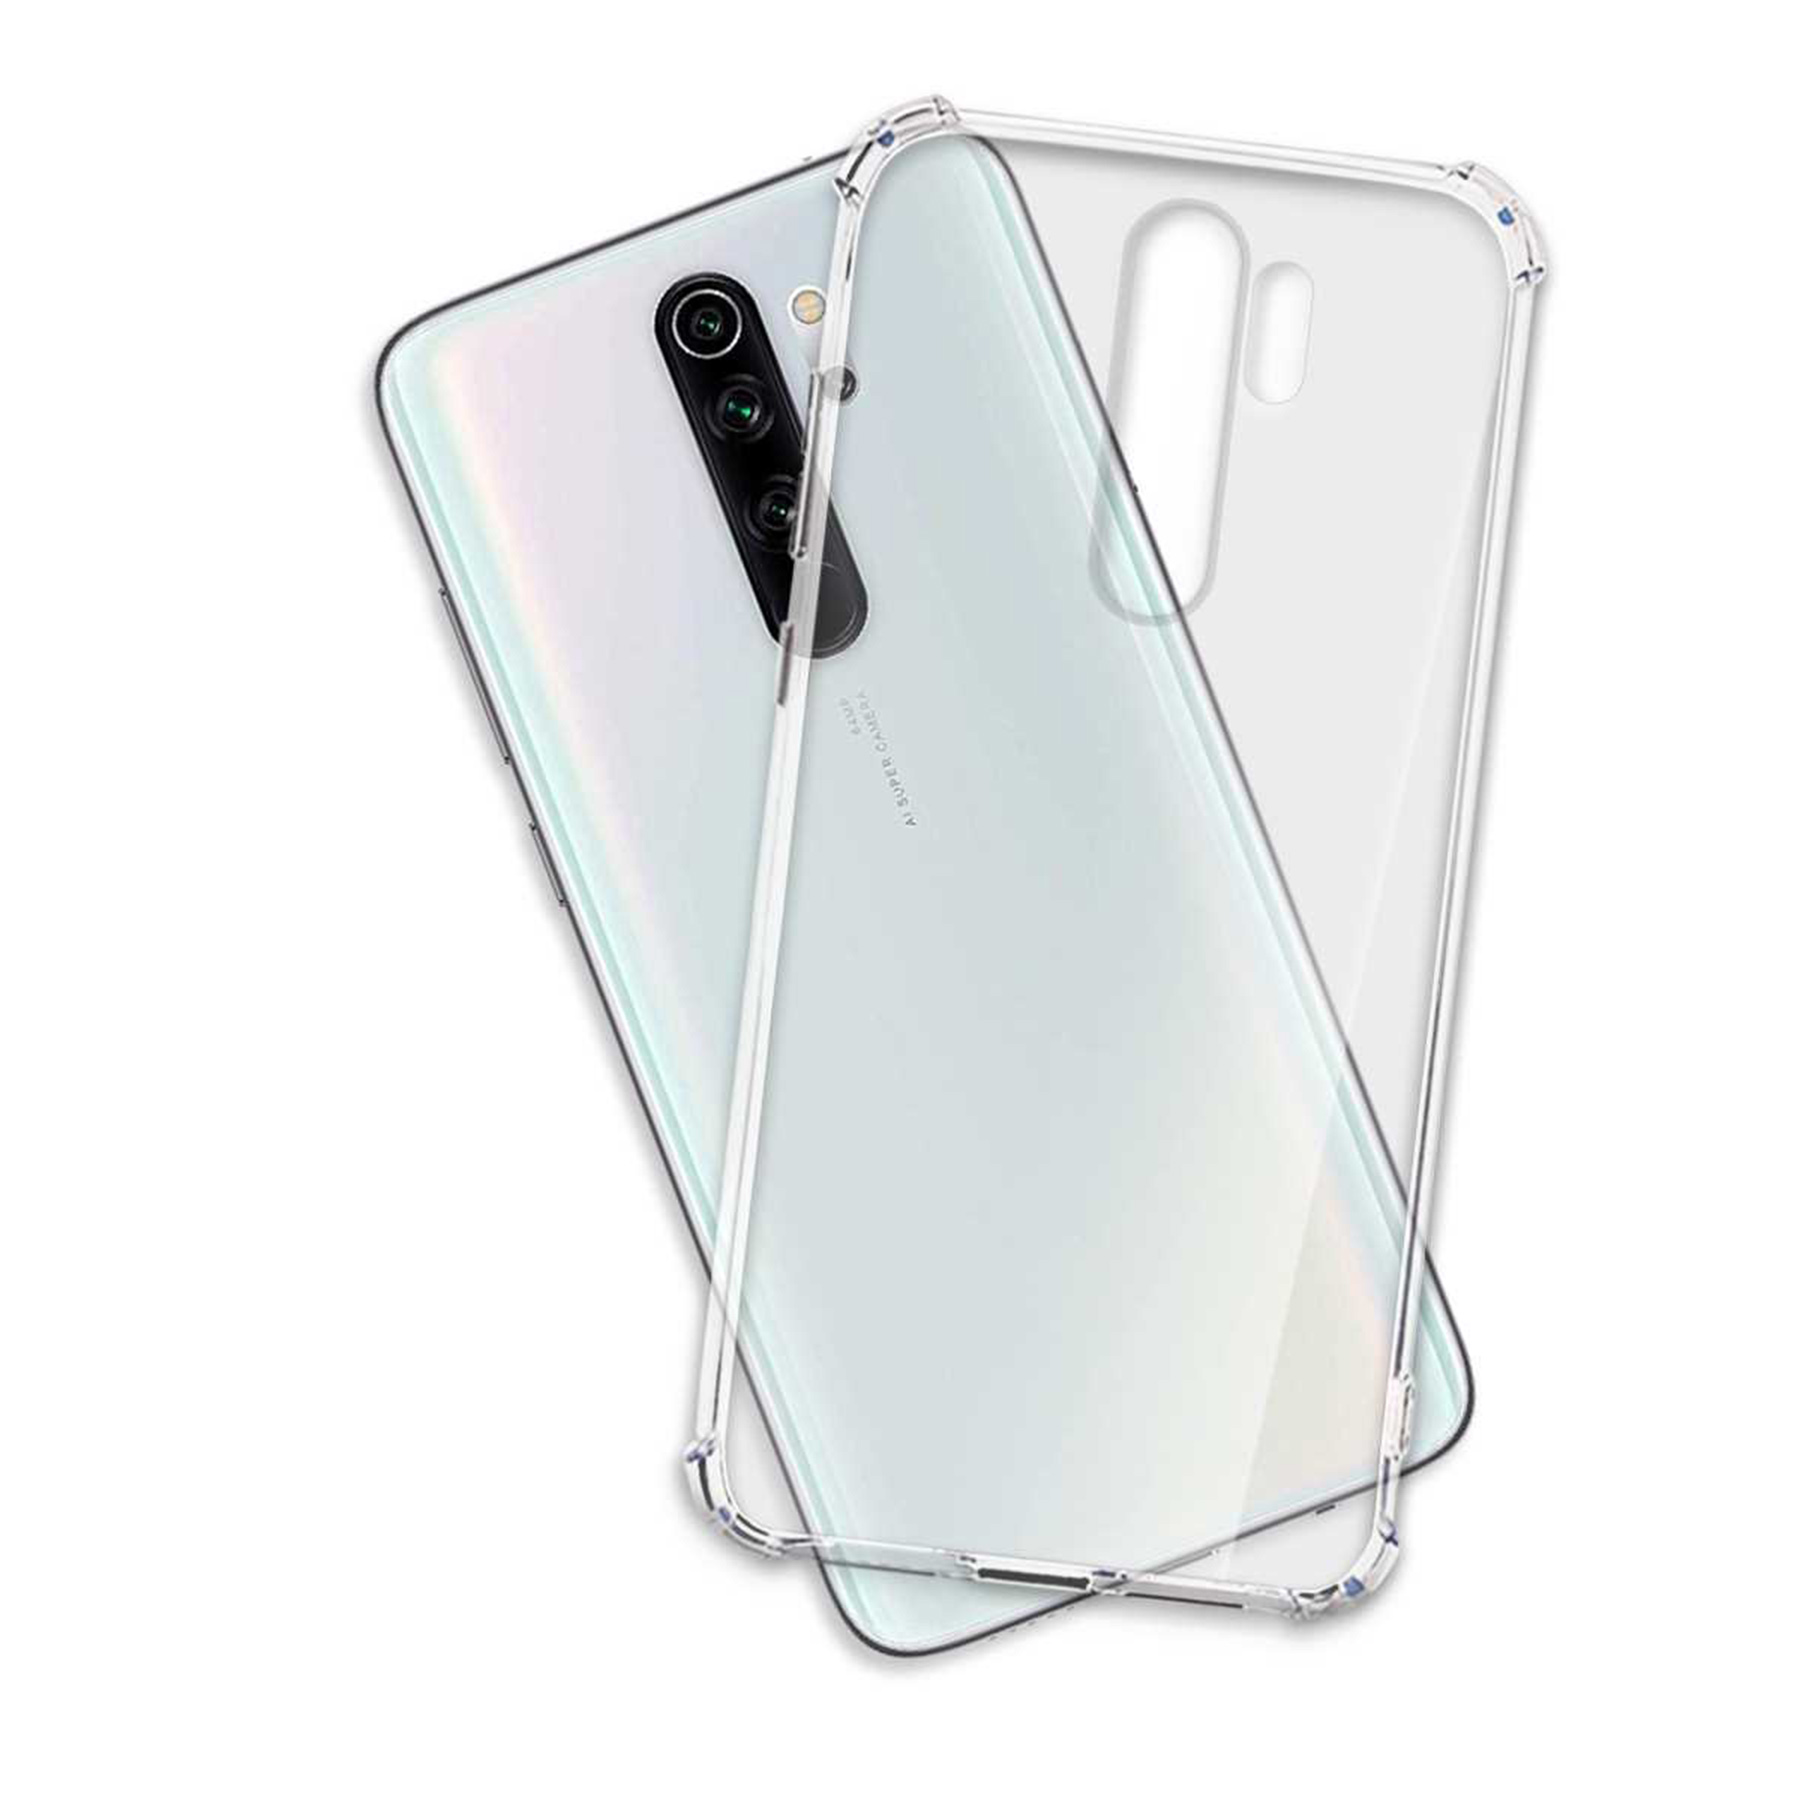 Backcover, MORE Case, Transparent ENERGY MTB Xiaomi, Clear Note 8 Redmi Pro, Armor